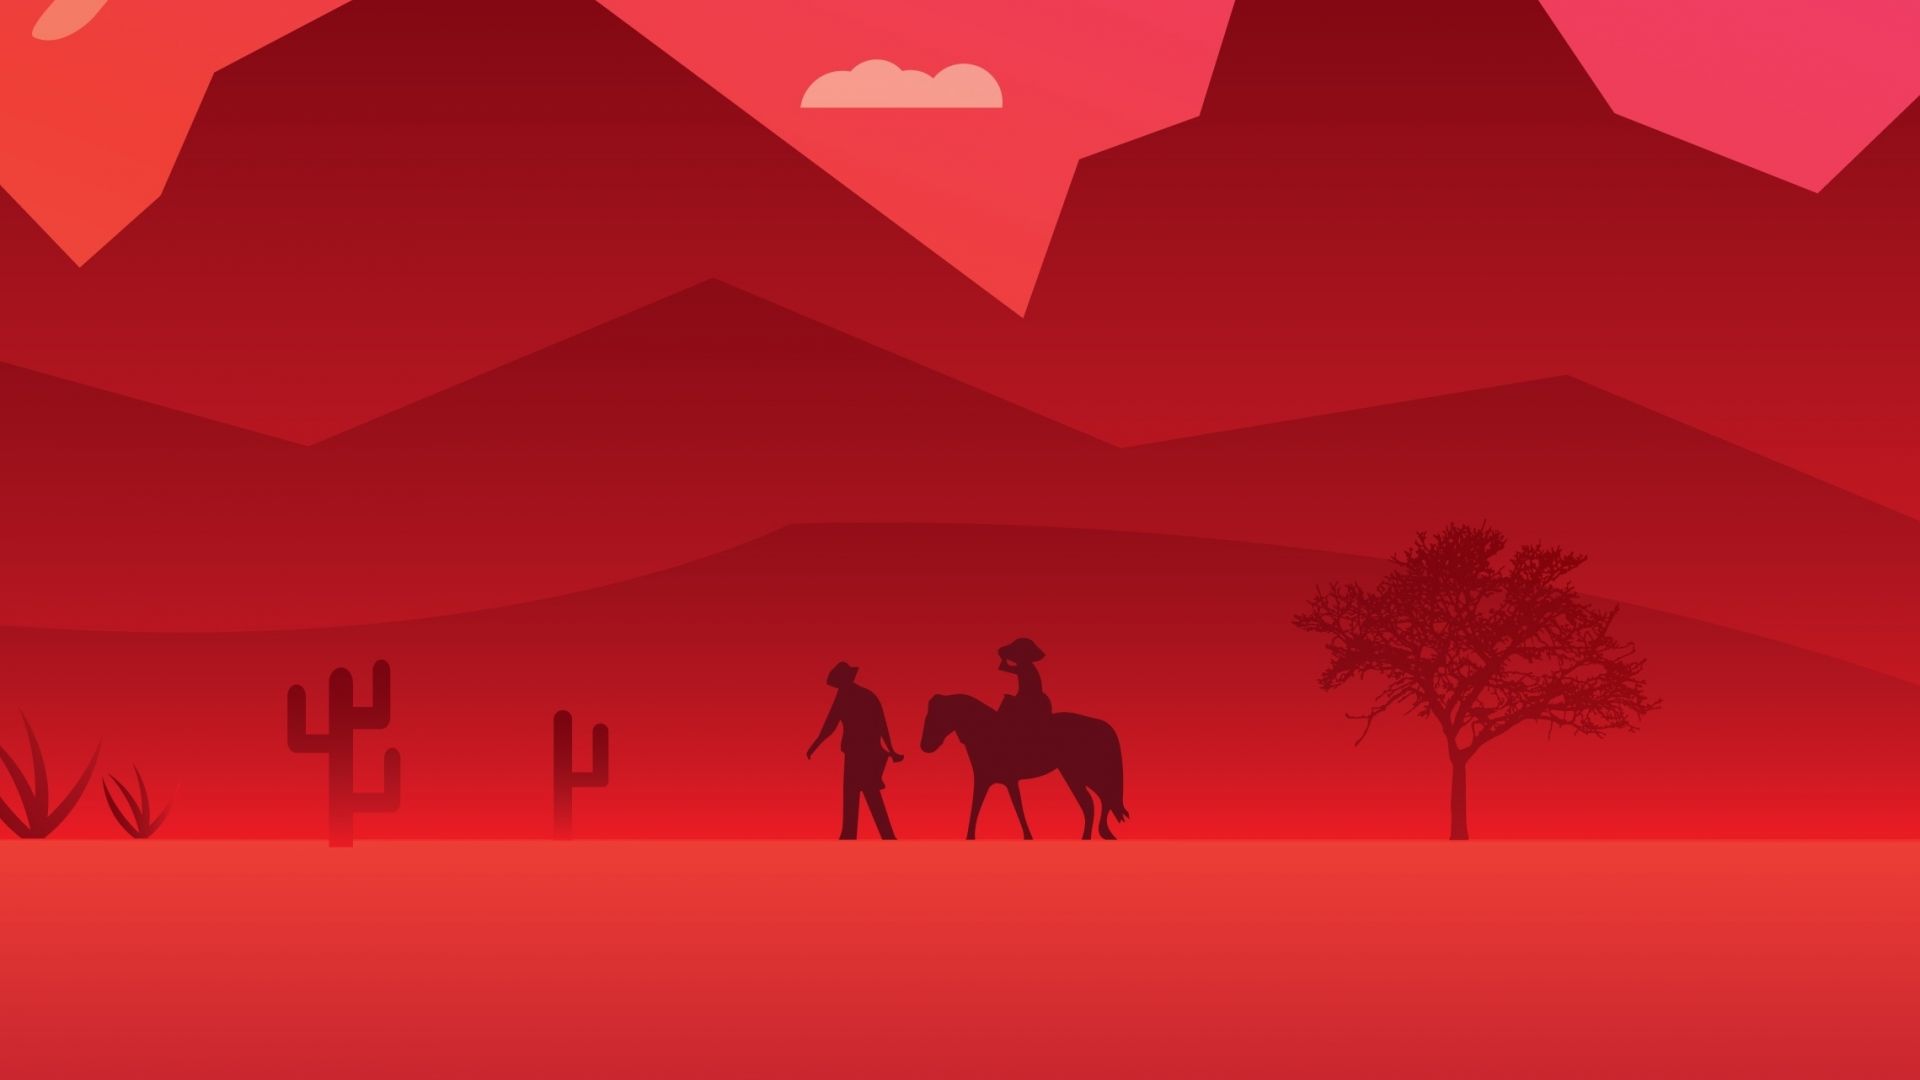 Desktop wallpaper mountains, minimal, red dead redemption video game, HD image, picture, background, c85841